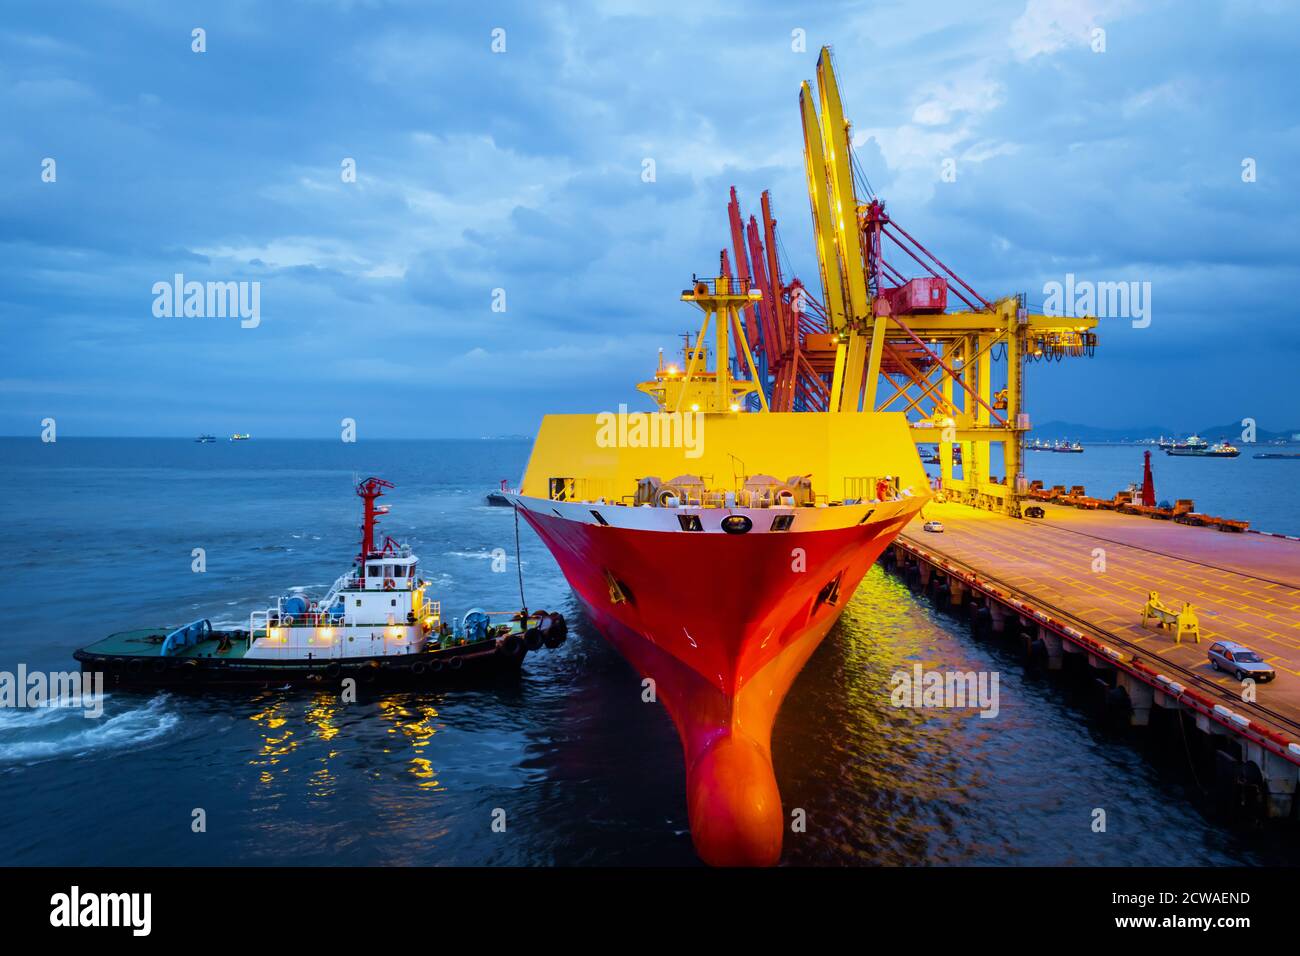 Tugboat push large cargo vessel to berth at port terminal. Port terminal operations and handling equipment. Stock Photo